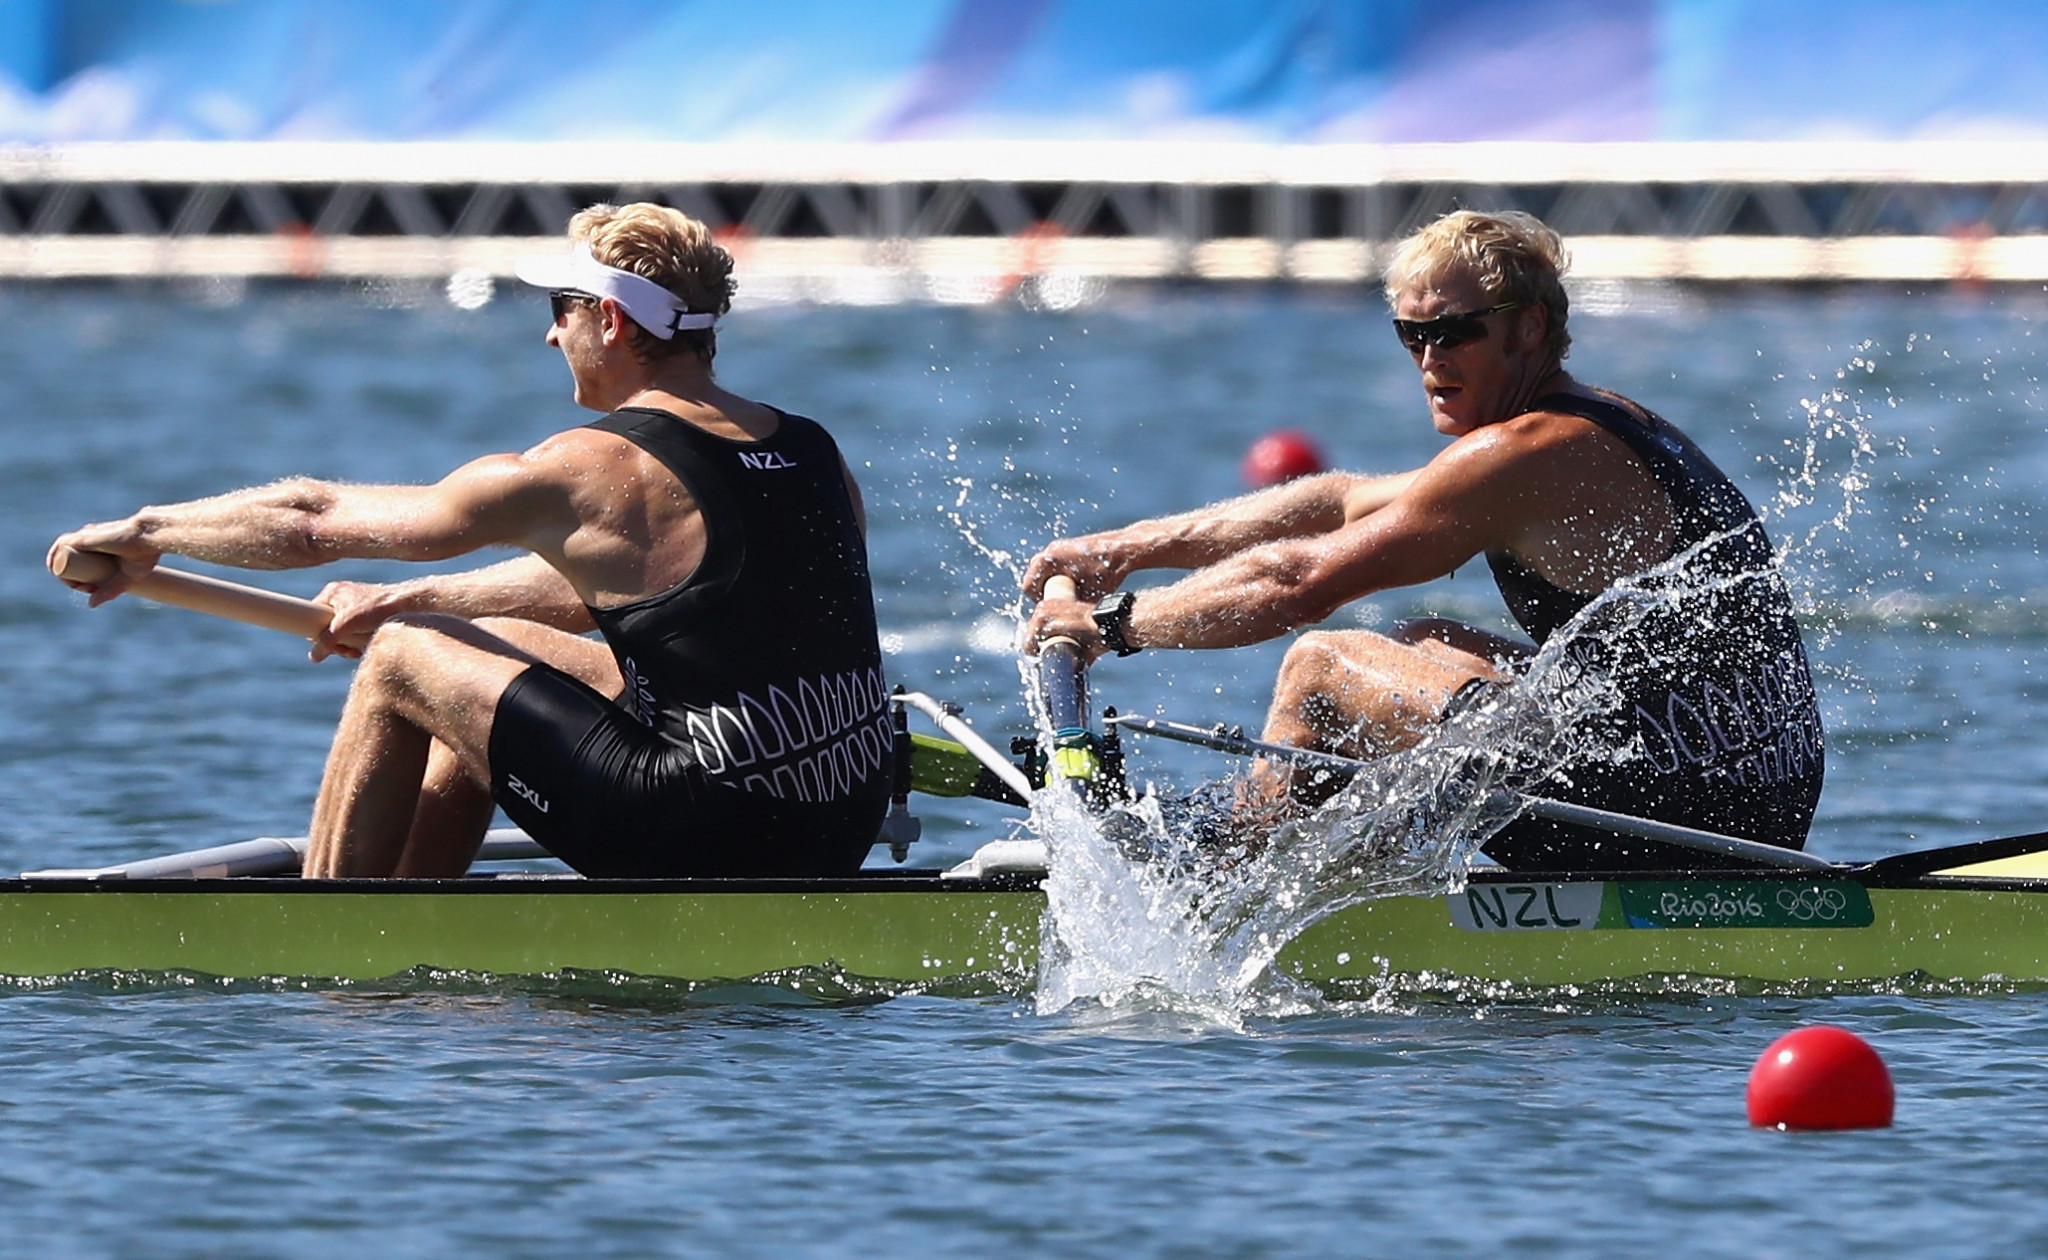 The New Zealand duo never lost a race together in the men's pair, winning 69 races in a row ©Getty Images